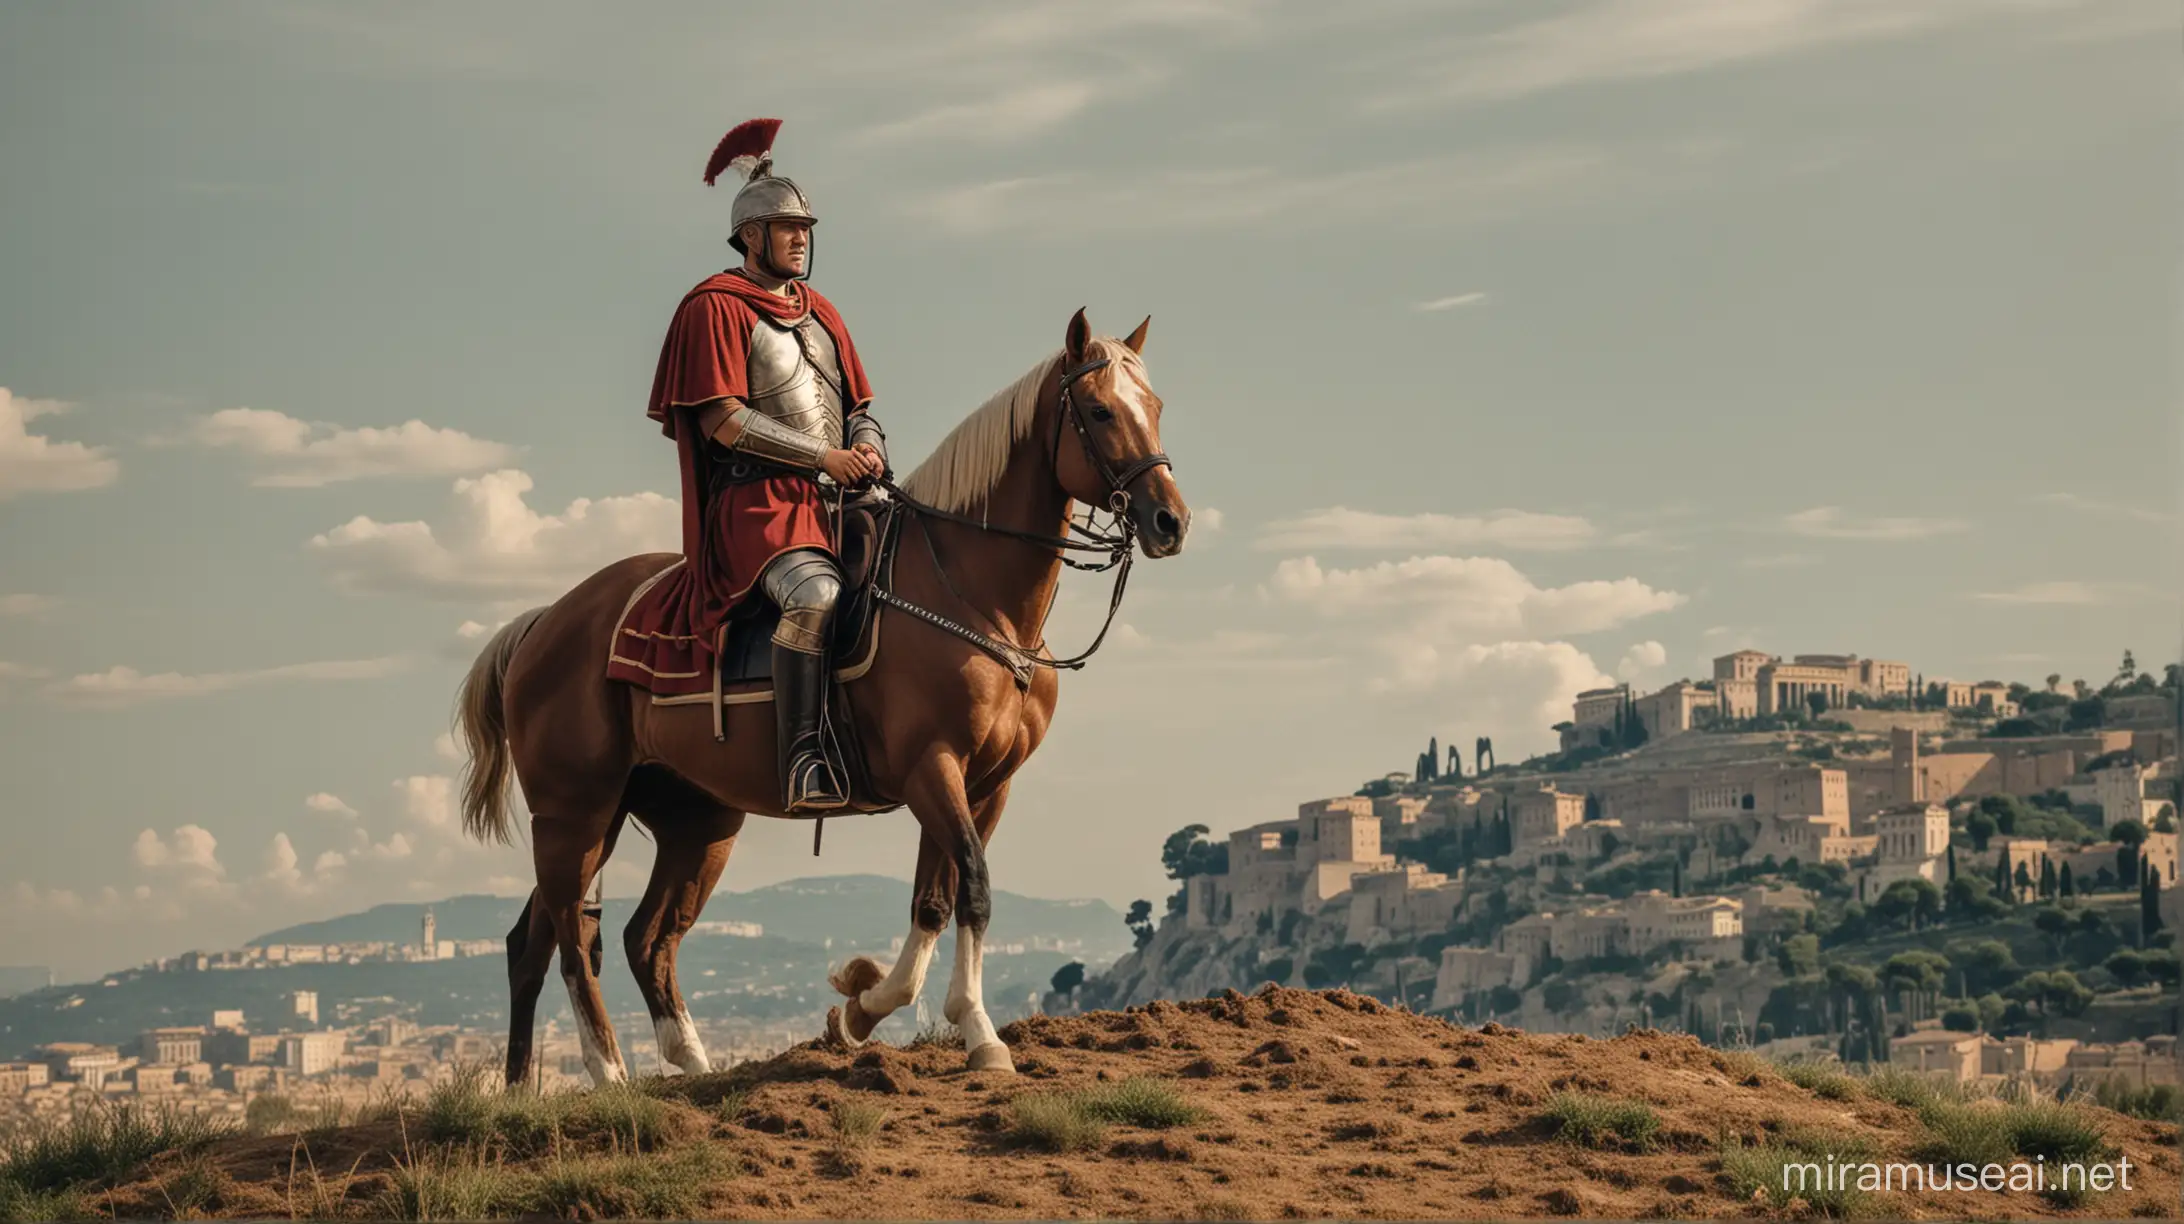 A Roman Prefect of the Equestrian order standing in a Hill in ancient Rome.